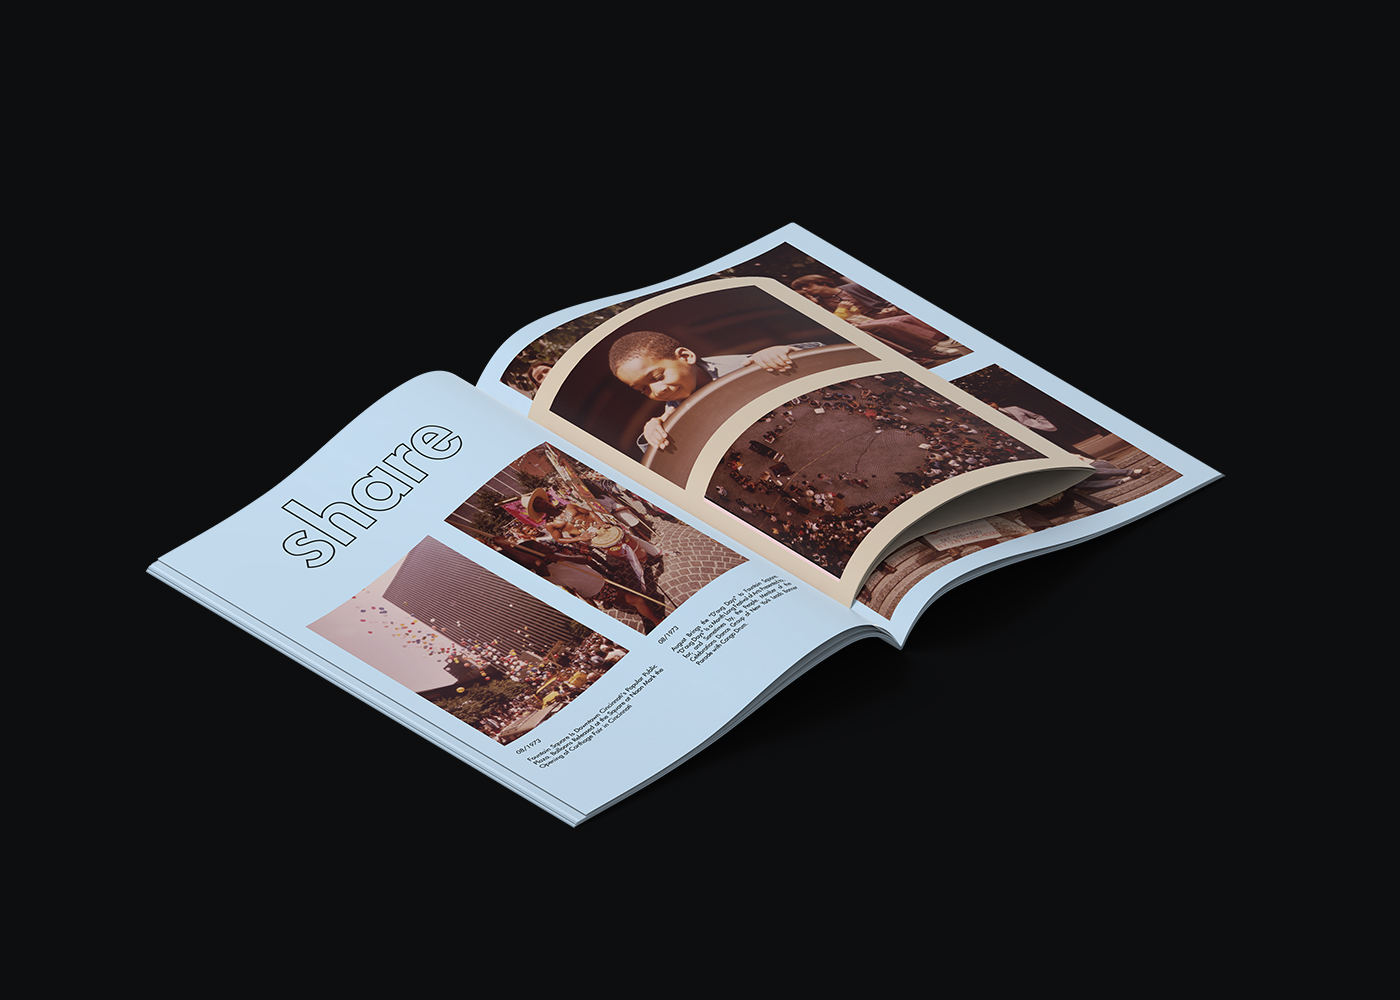 print editorial design  book magazine documerica journalism   Photography  typography   colors Layout